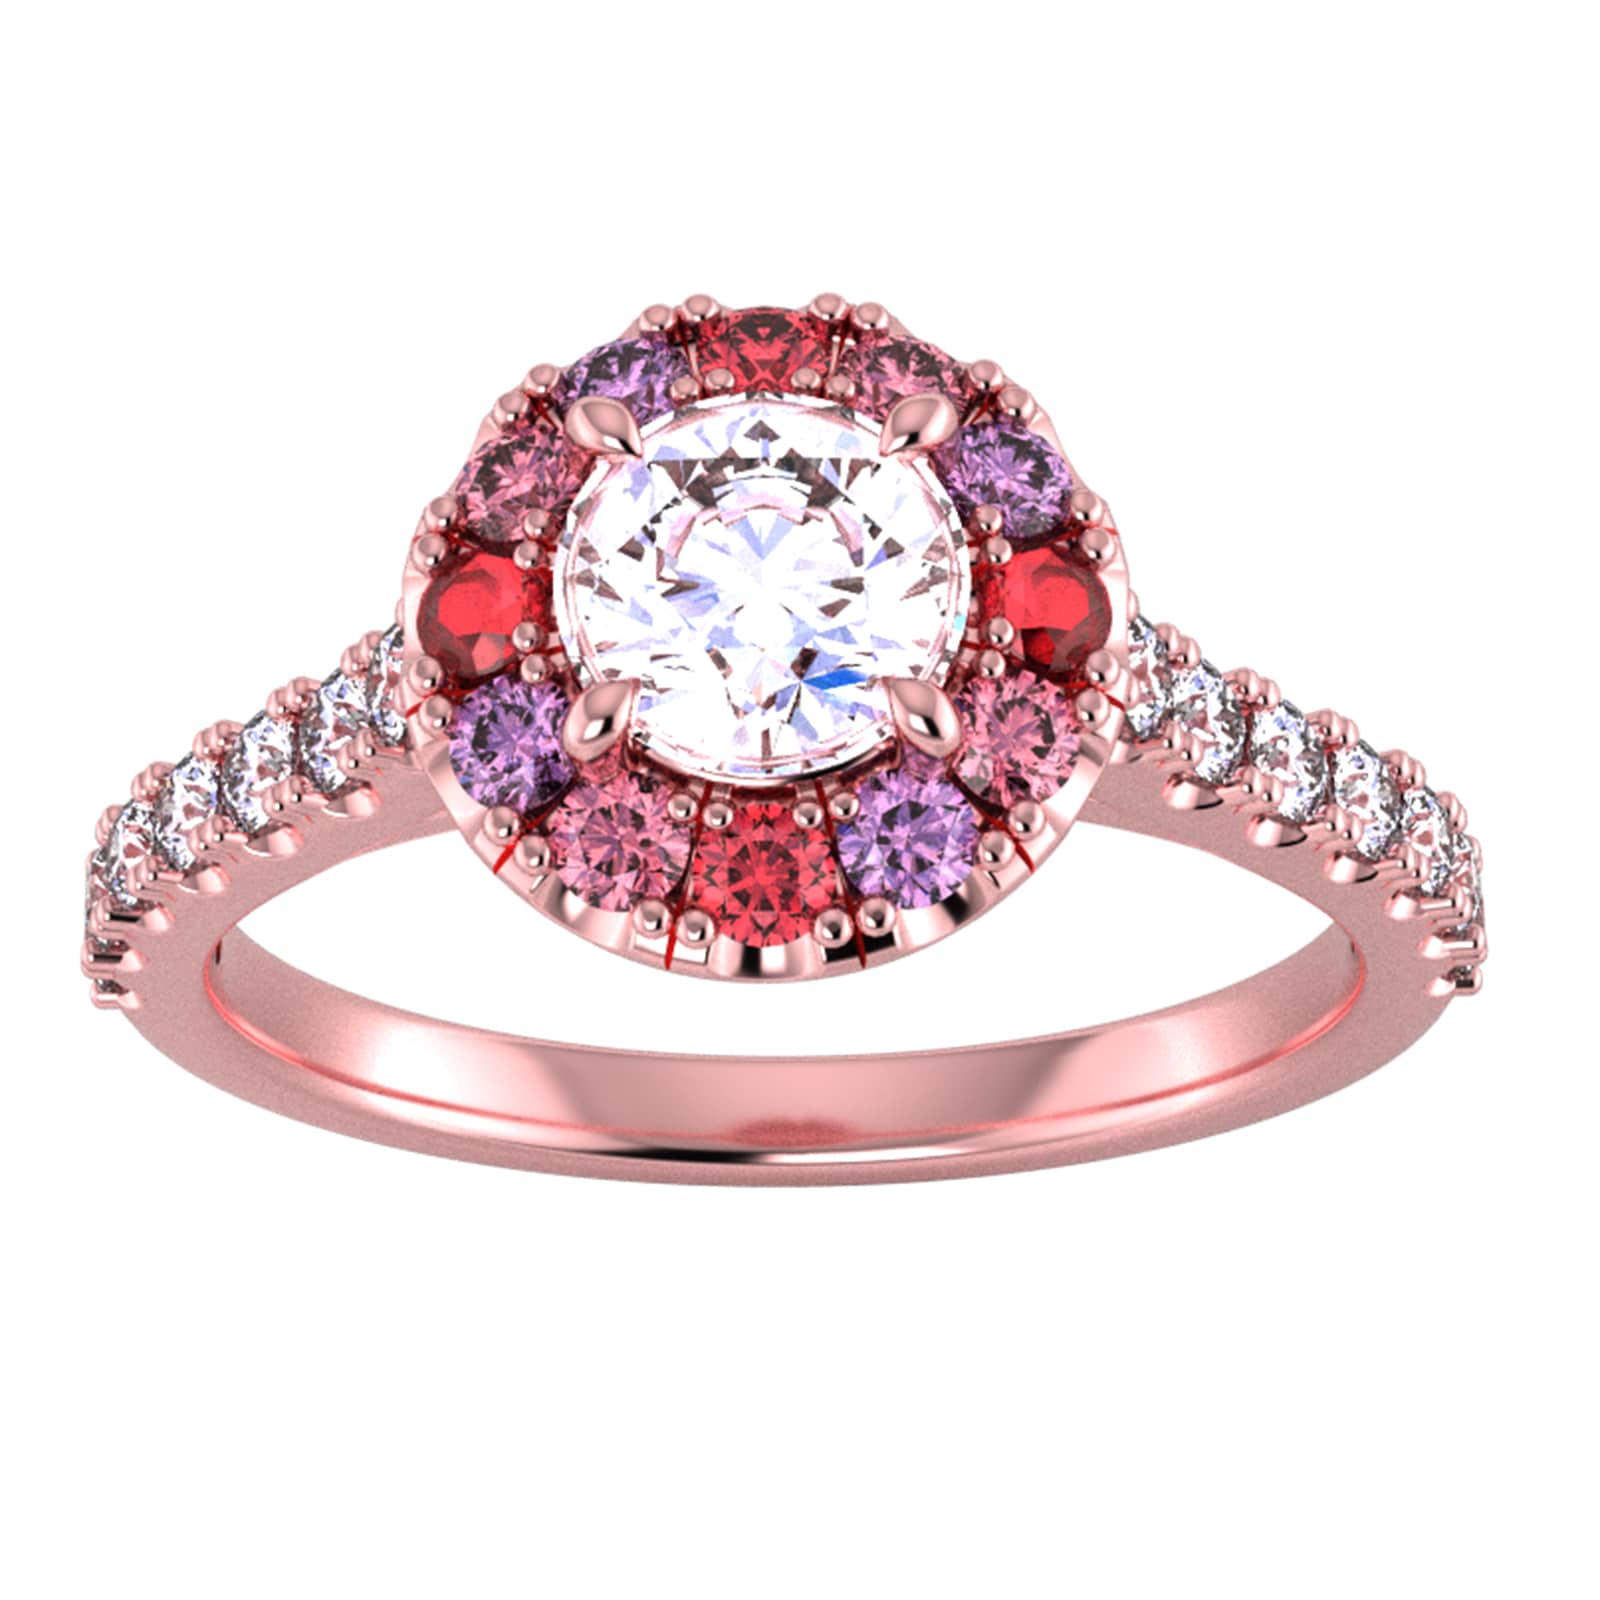 9ct Rose Gold Diamond & Pink, Red, Purple Sapphire Halo Ring - Ring Size T.5